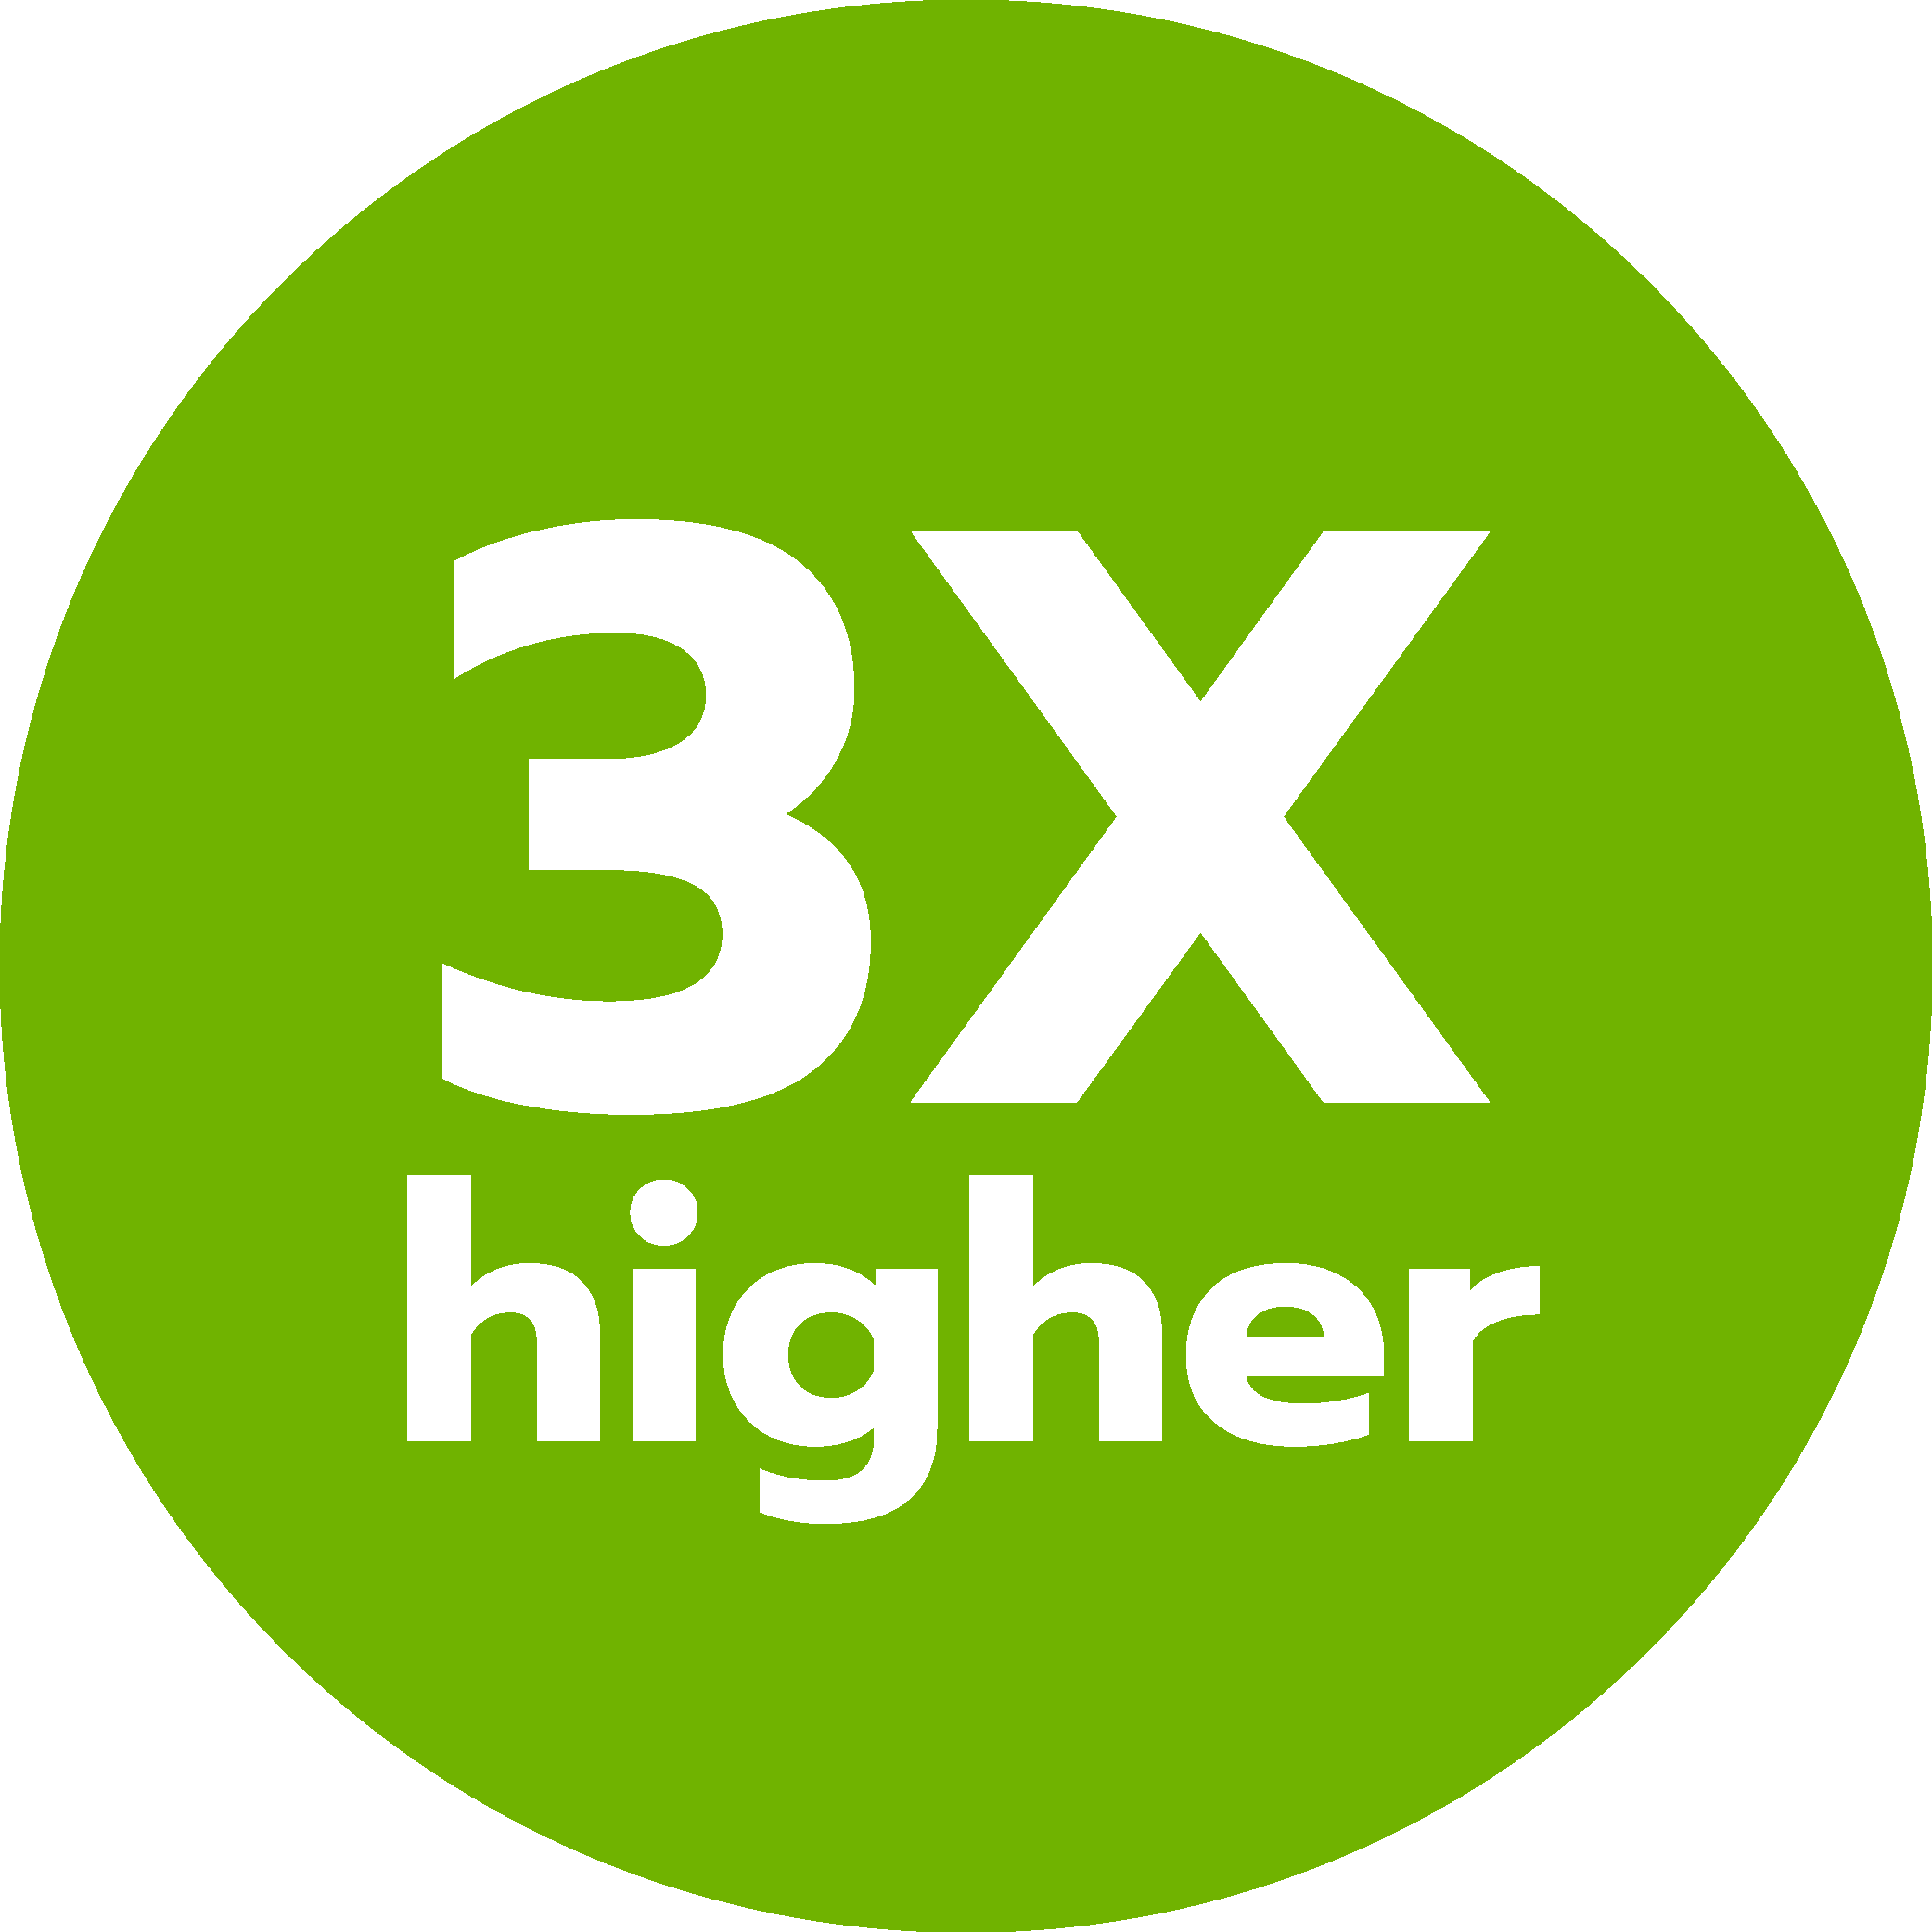 3X higher email open rates